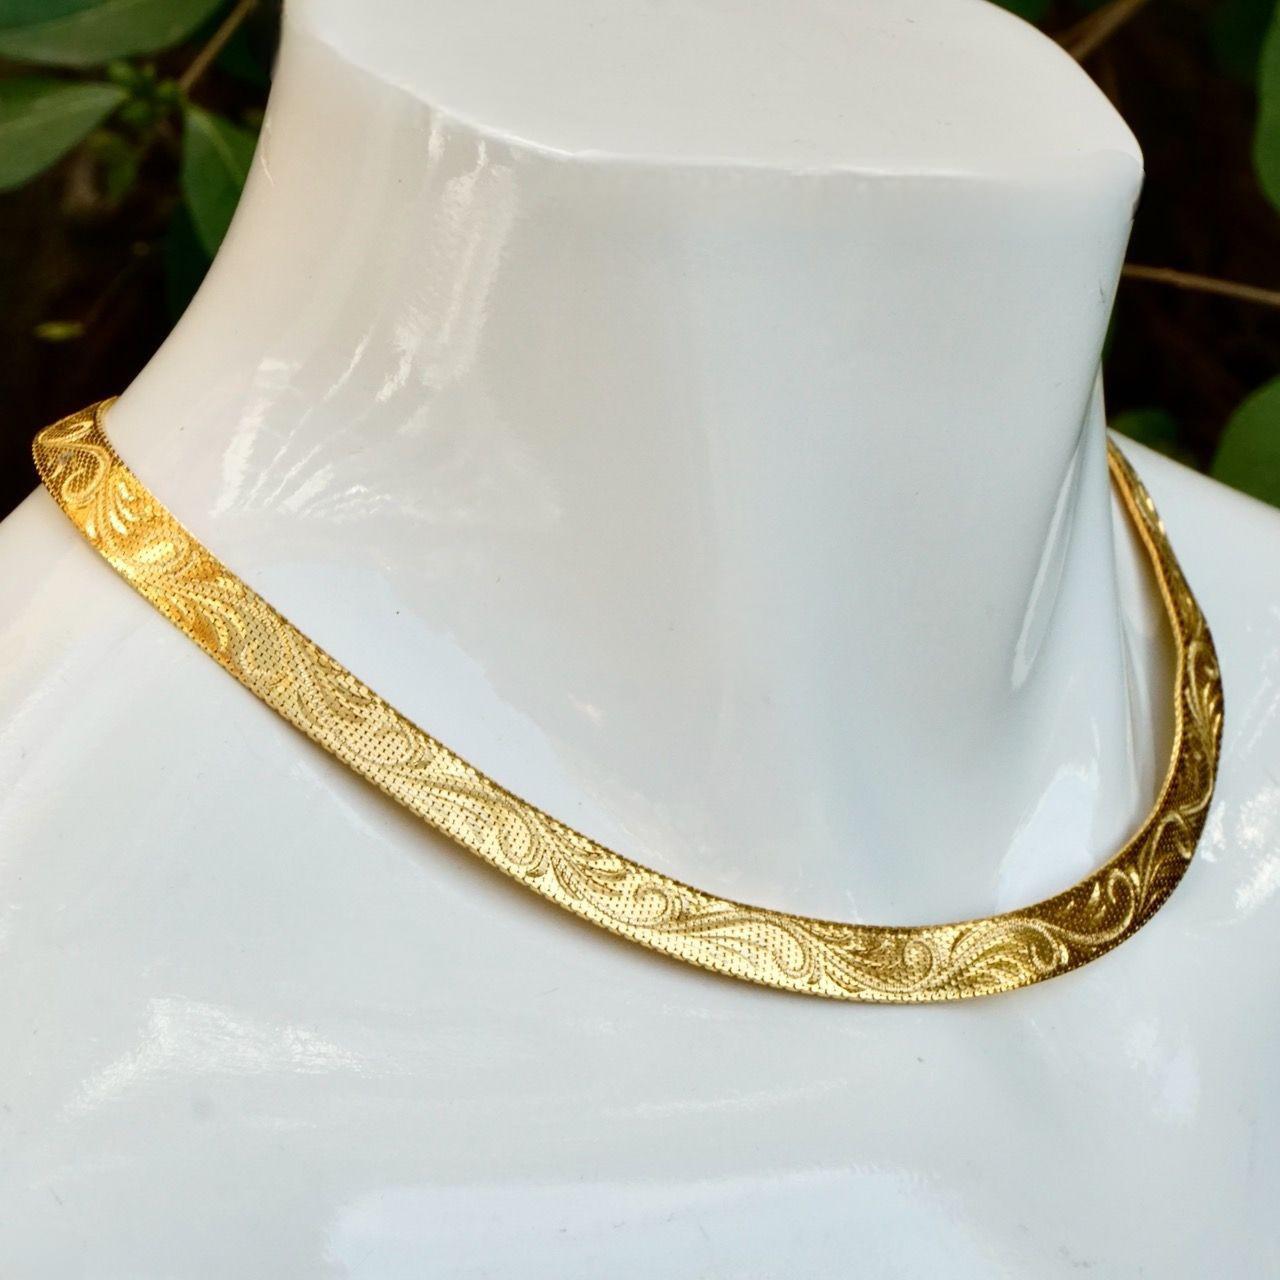 Gold Plated Swirl Design Egyptian Revival Mesh Collar Necklace circa 1980s 1